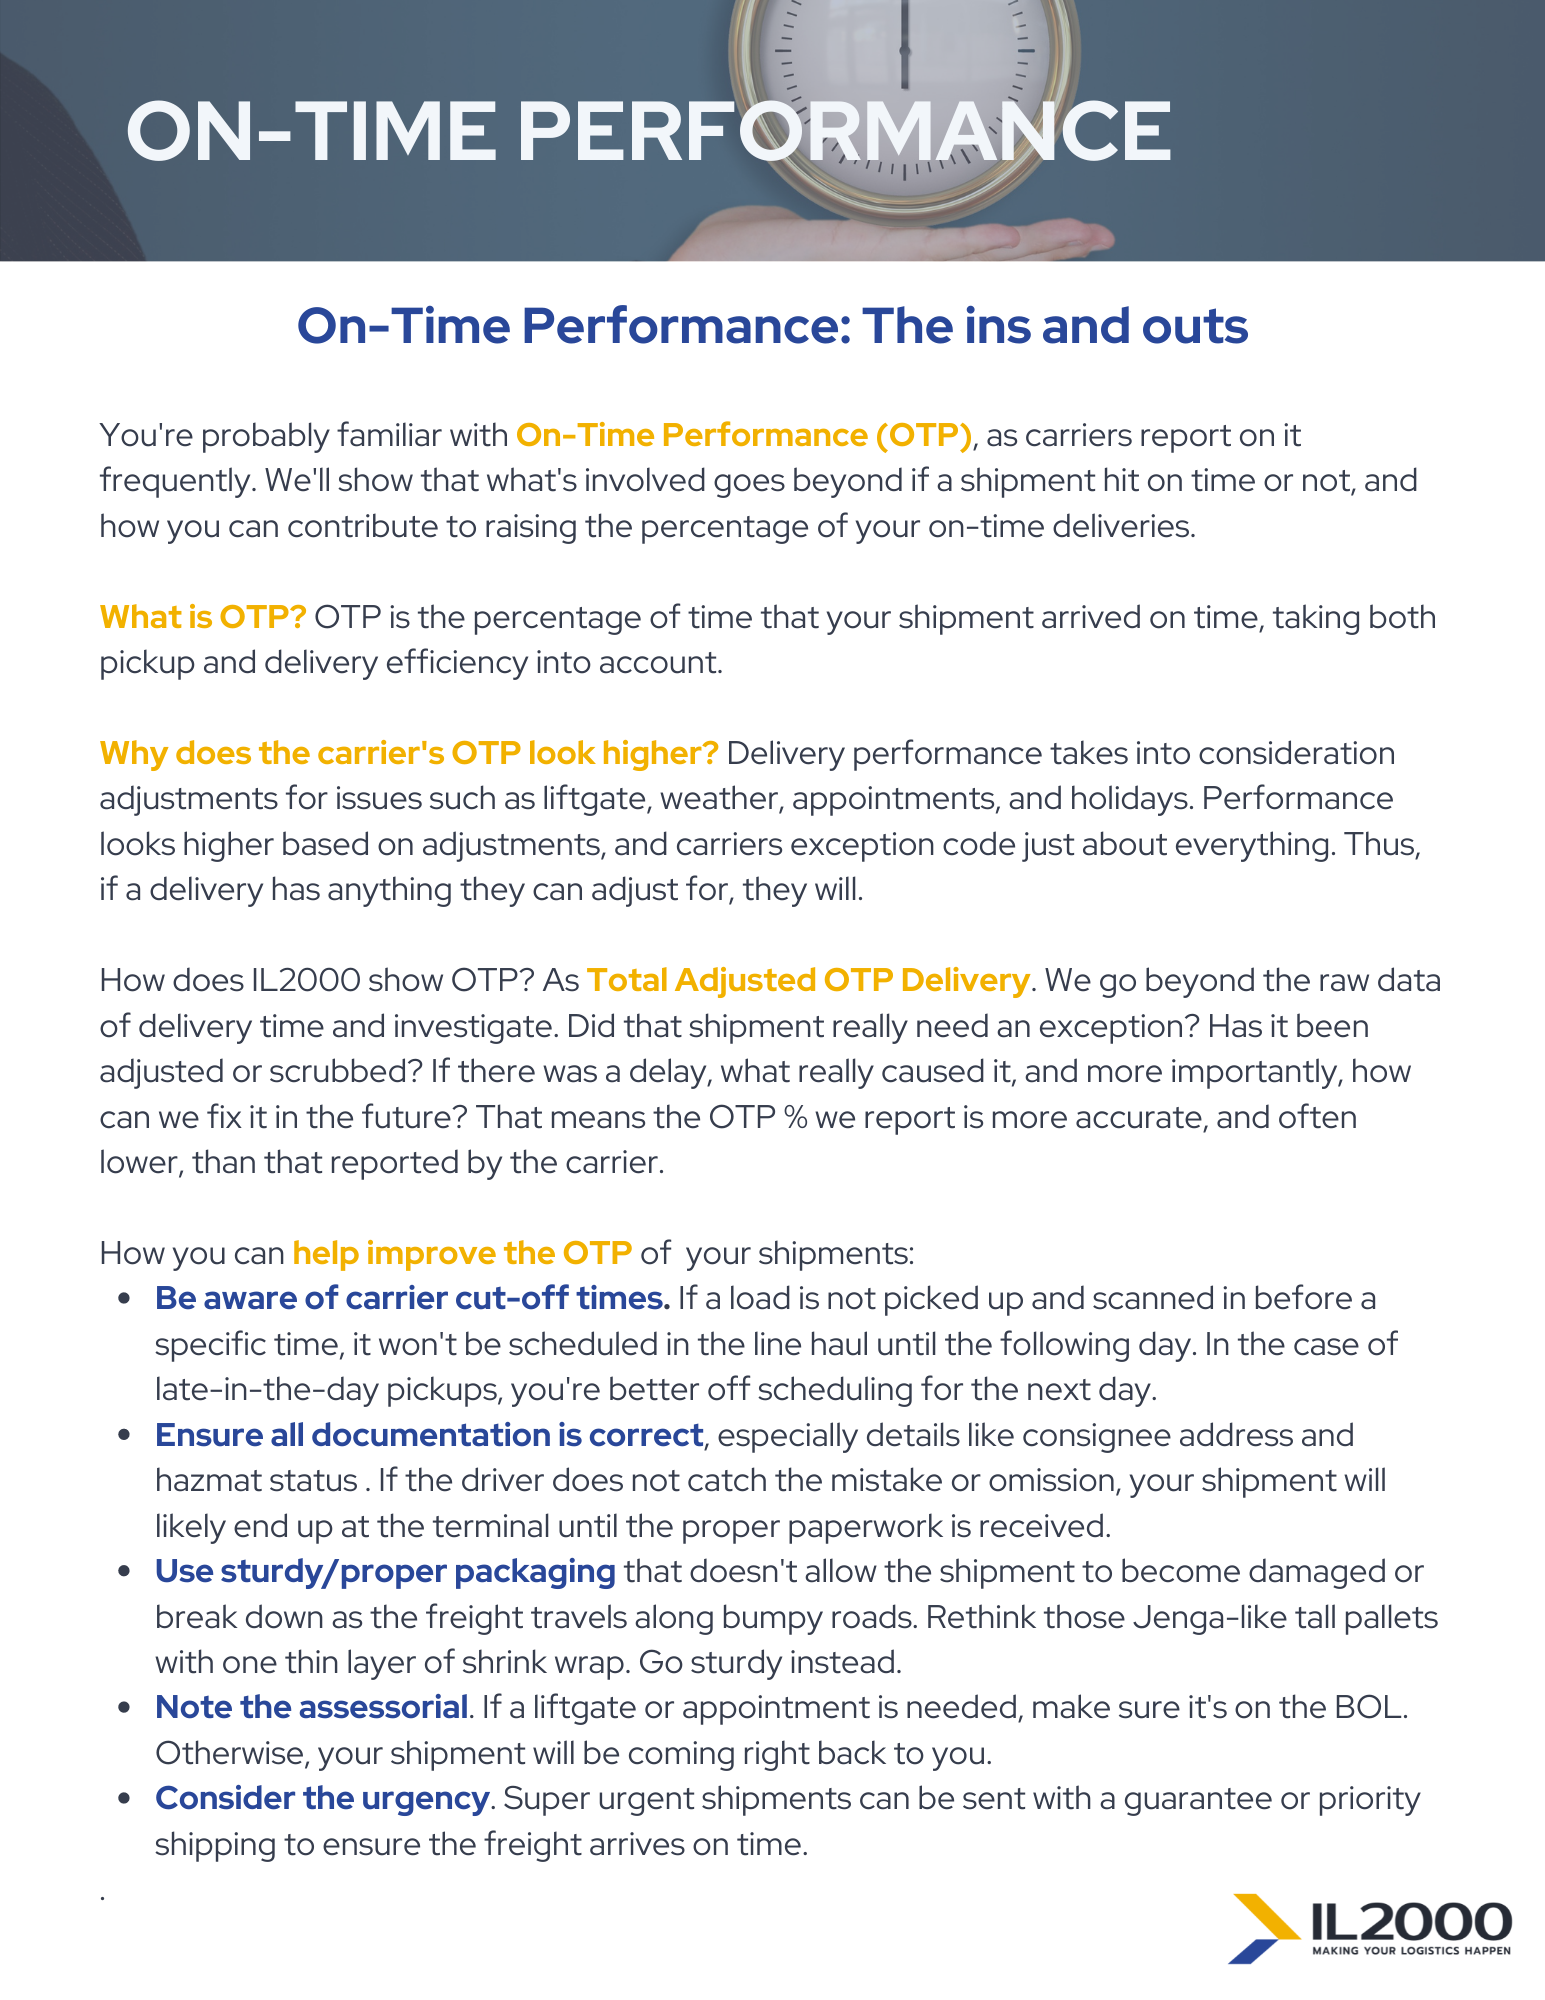 One Sheet_On-Time Performance